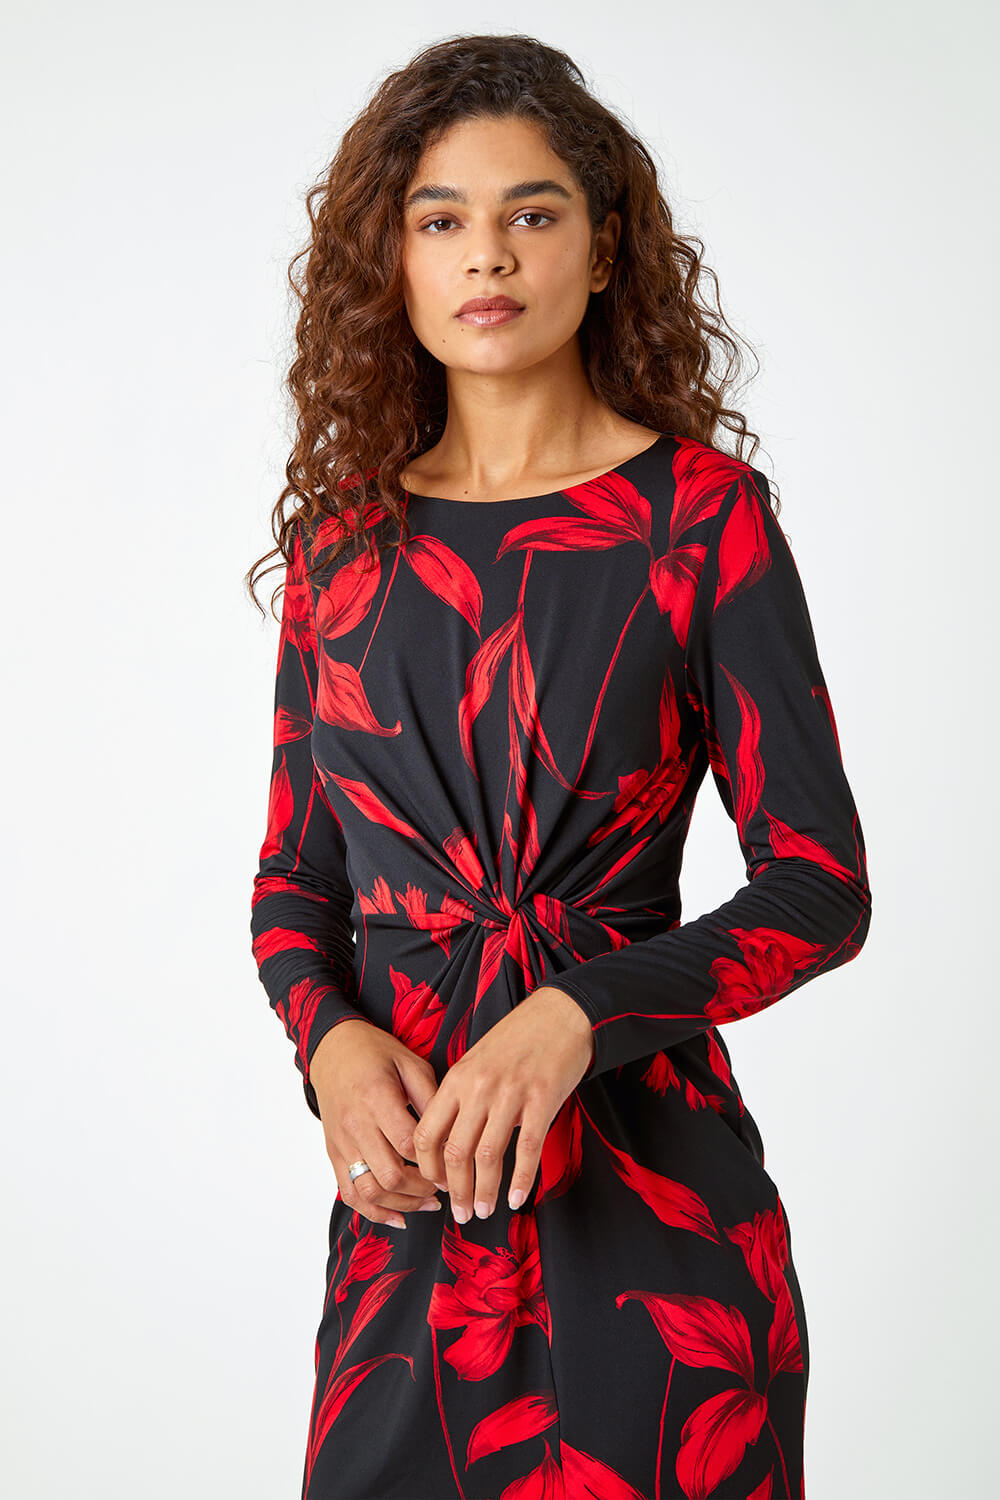 Red Floral Print Twist Detail Stretch Dress, Image 4 of 5